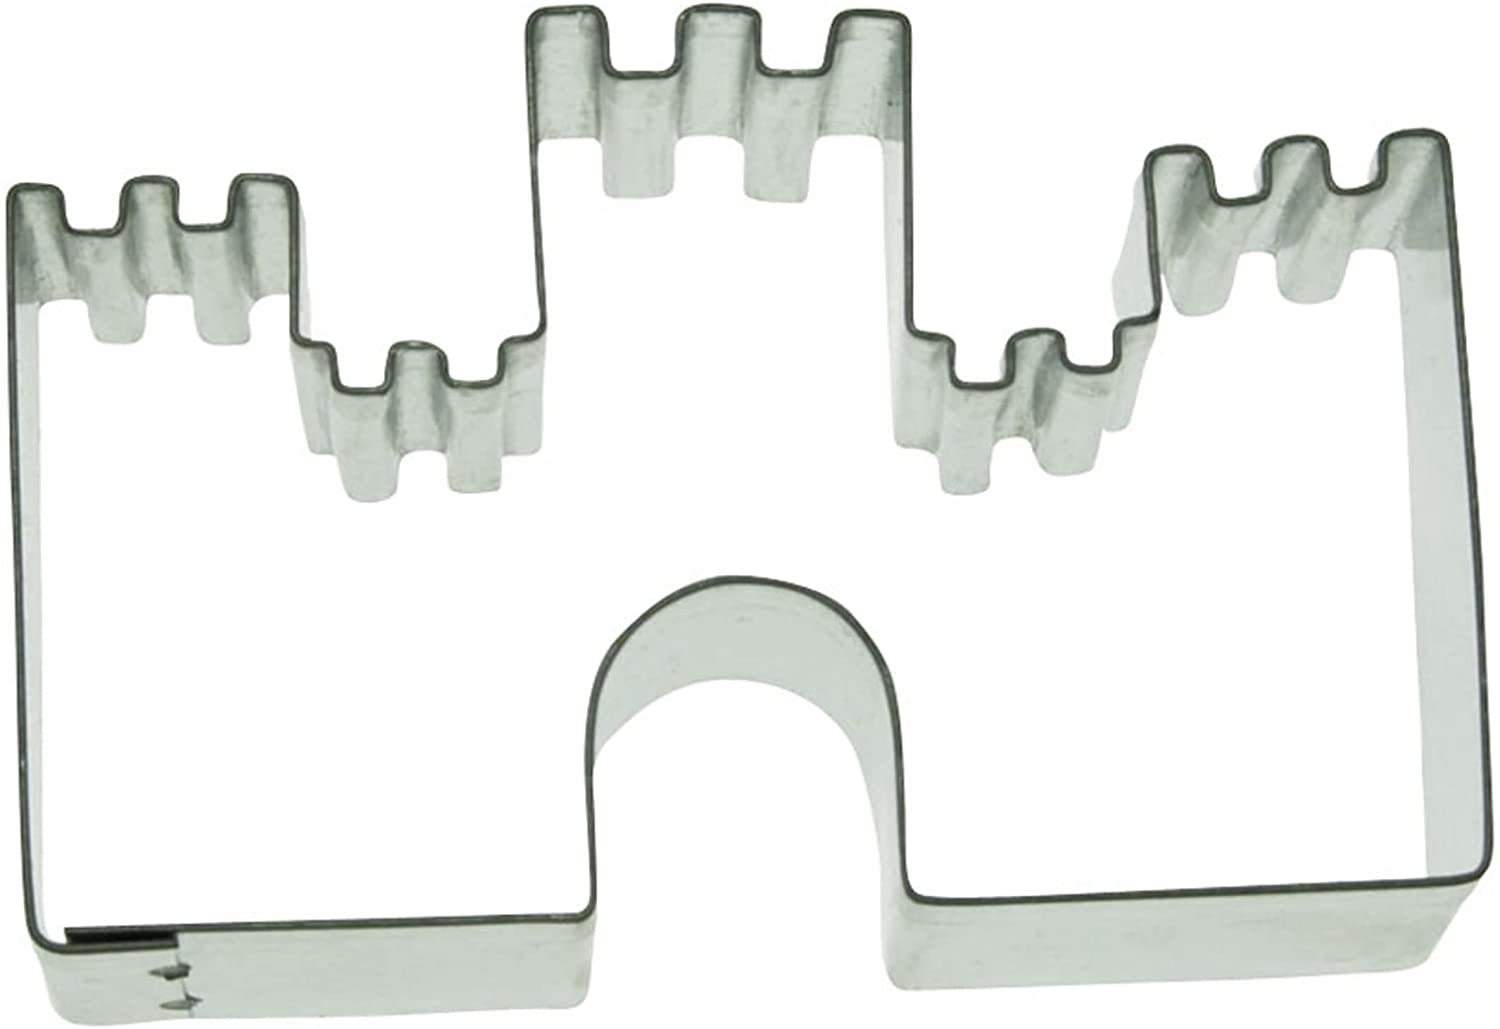 Staedter Castle Cookie Cutter, Stainless Steel, About 7 Cm